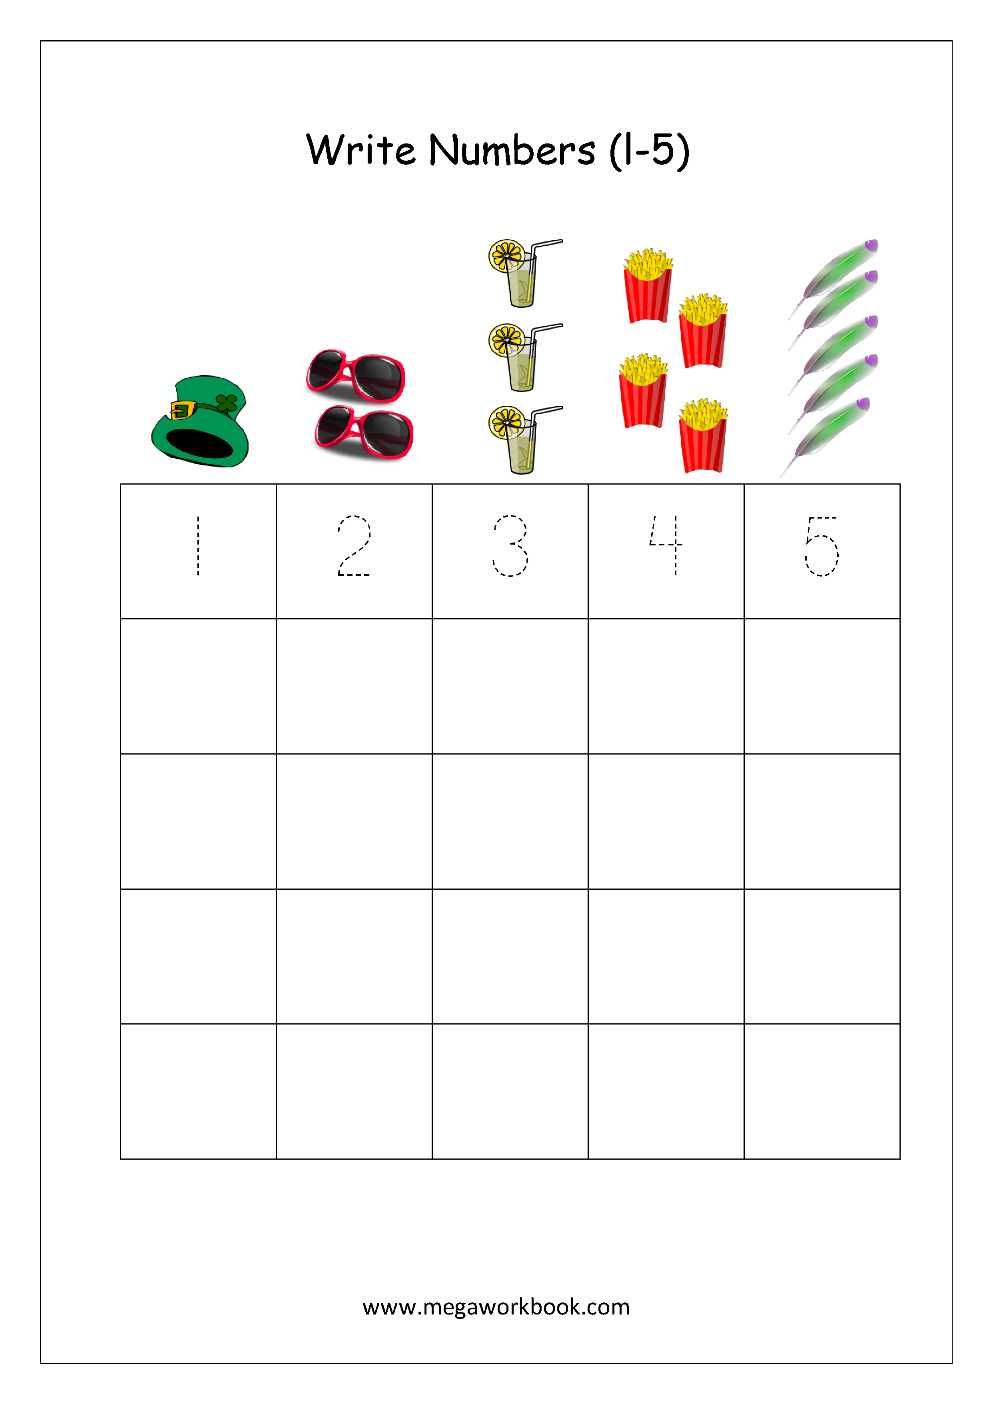 number-tracing-tracing-numbers-number-tracing-worksheets-tracing-numbers-1-to-10-number